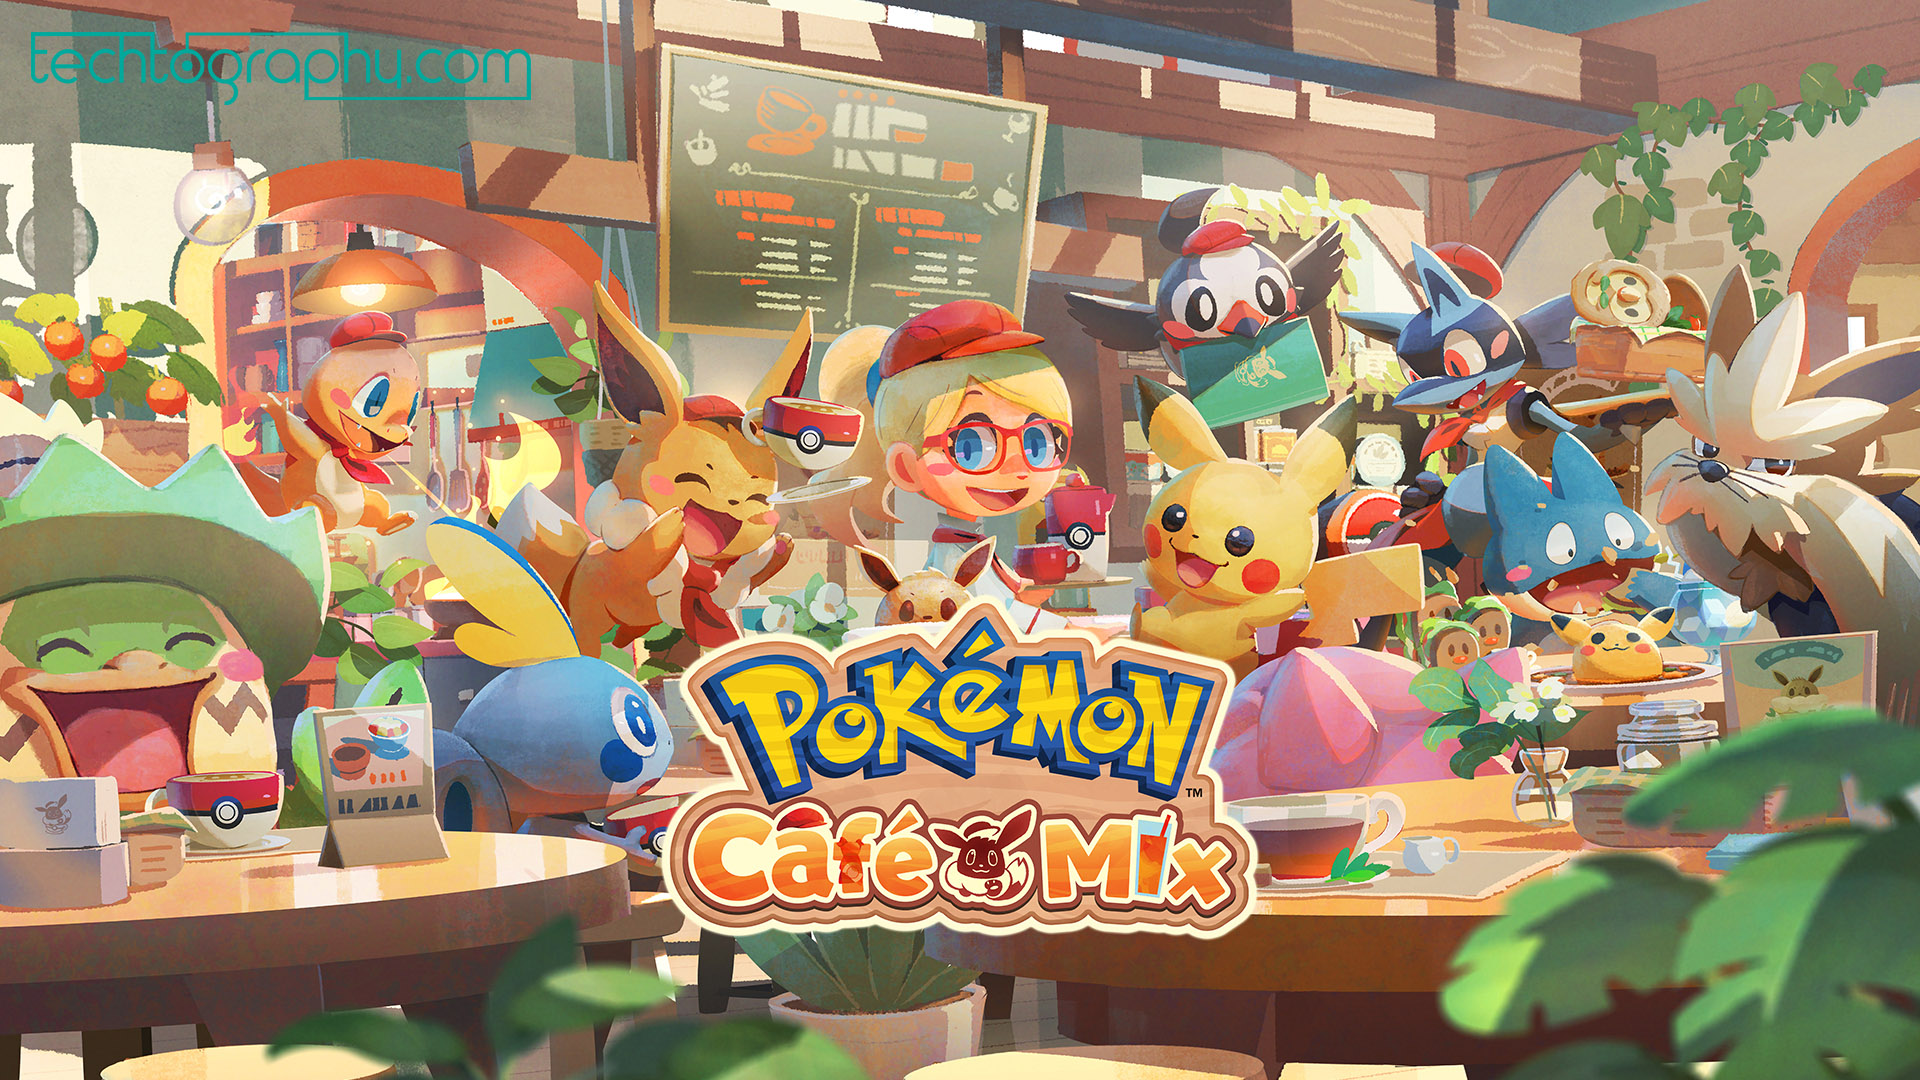 A New Pokemon Game Now Out for Mobile and Nintendo Switch!